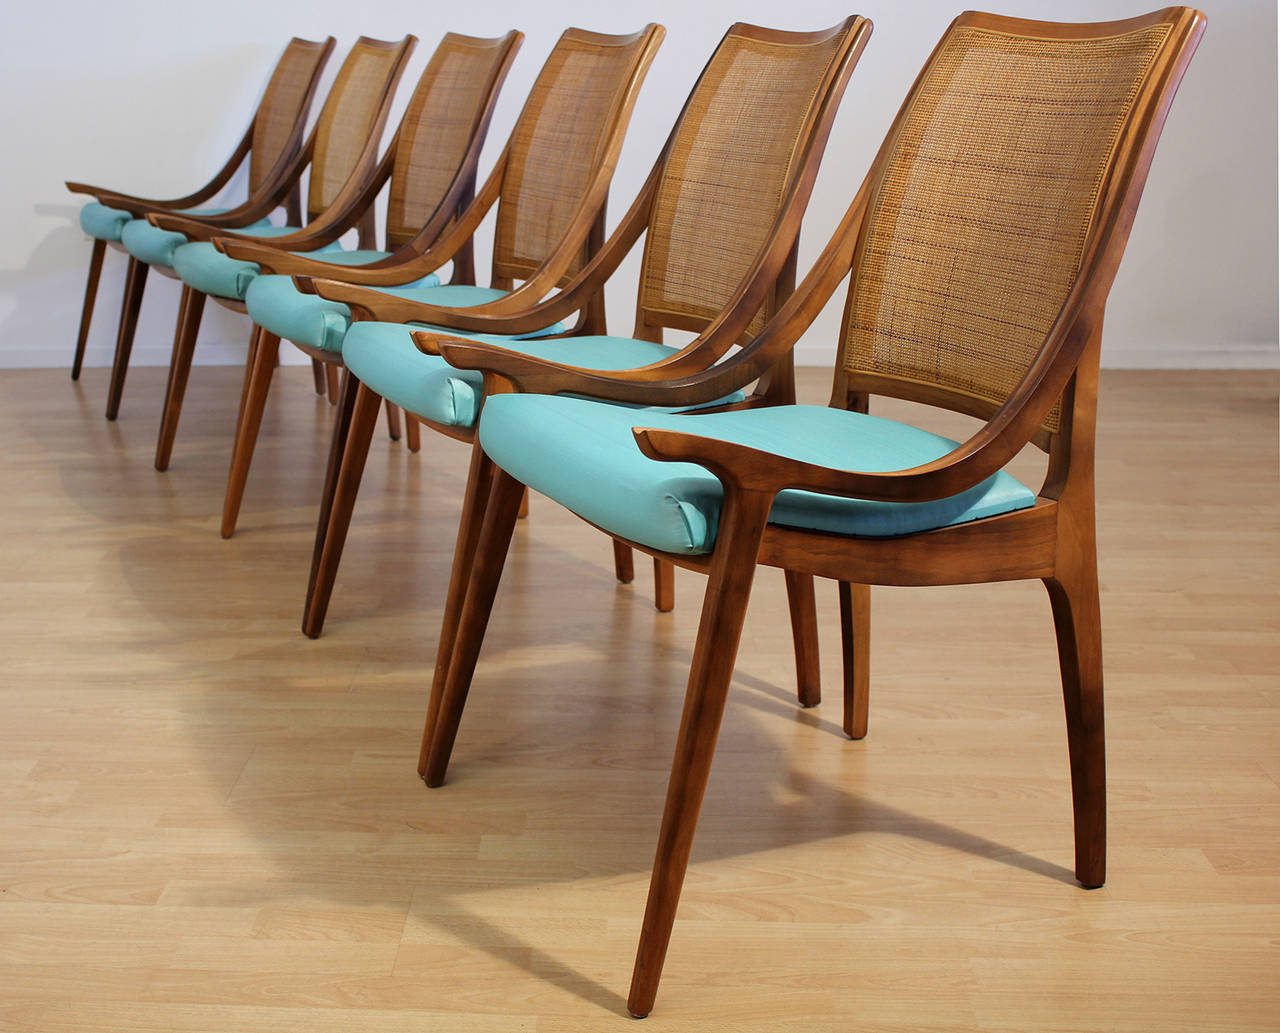 Set of six cane backed walnut dining chairs with original light teal blue seat cushions designed by Richard Thompson for Glenn of California. Chairs are in excellent original condition. A not often seen elegant modern design with low scooping